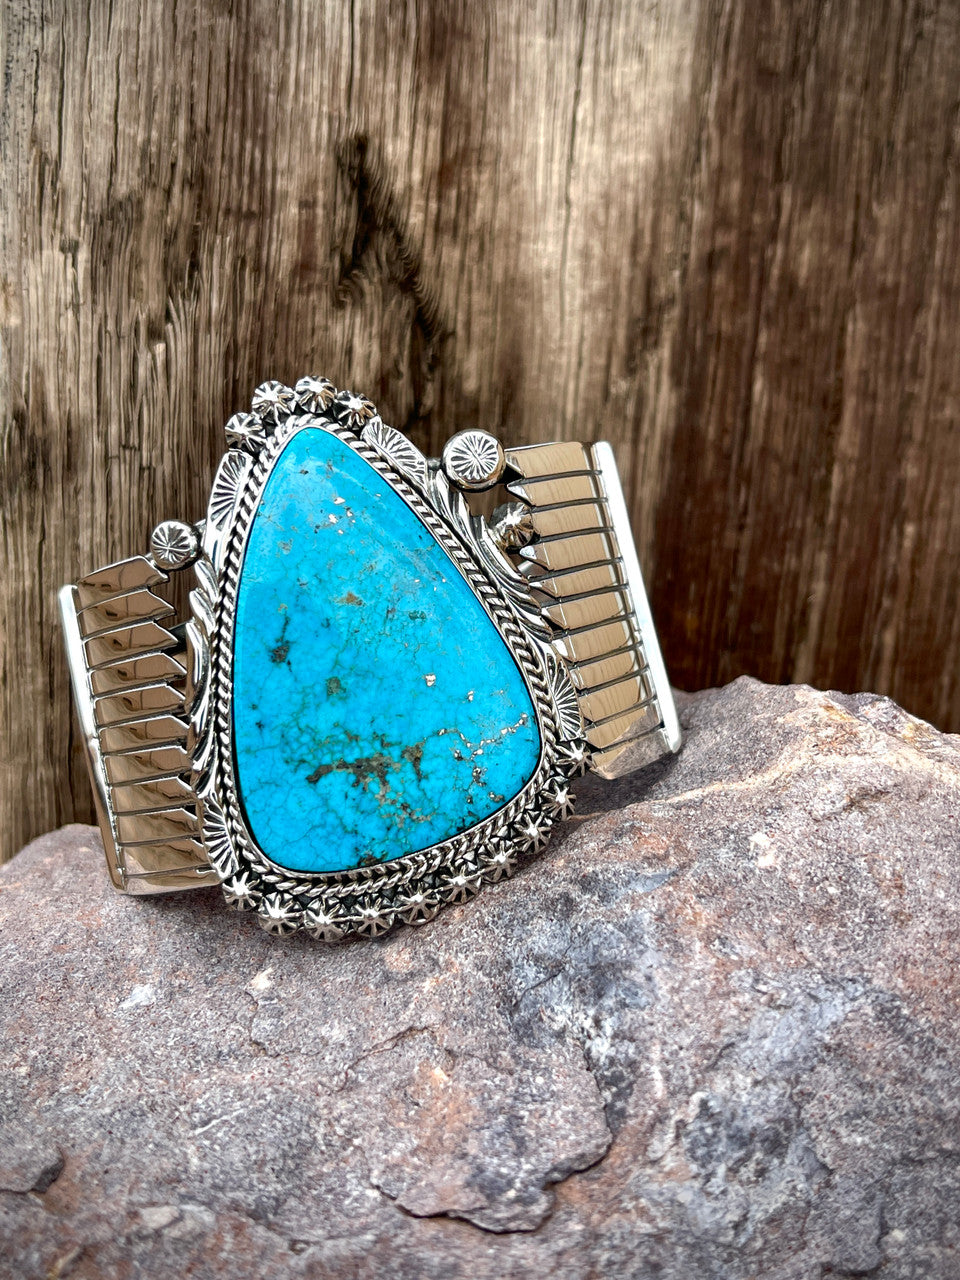 Clarence Long's High Grade Nevada Cuff (one of a kind)